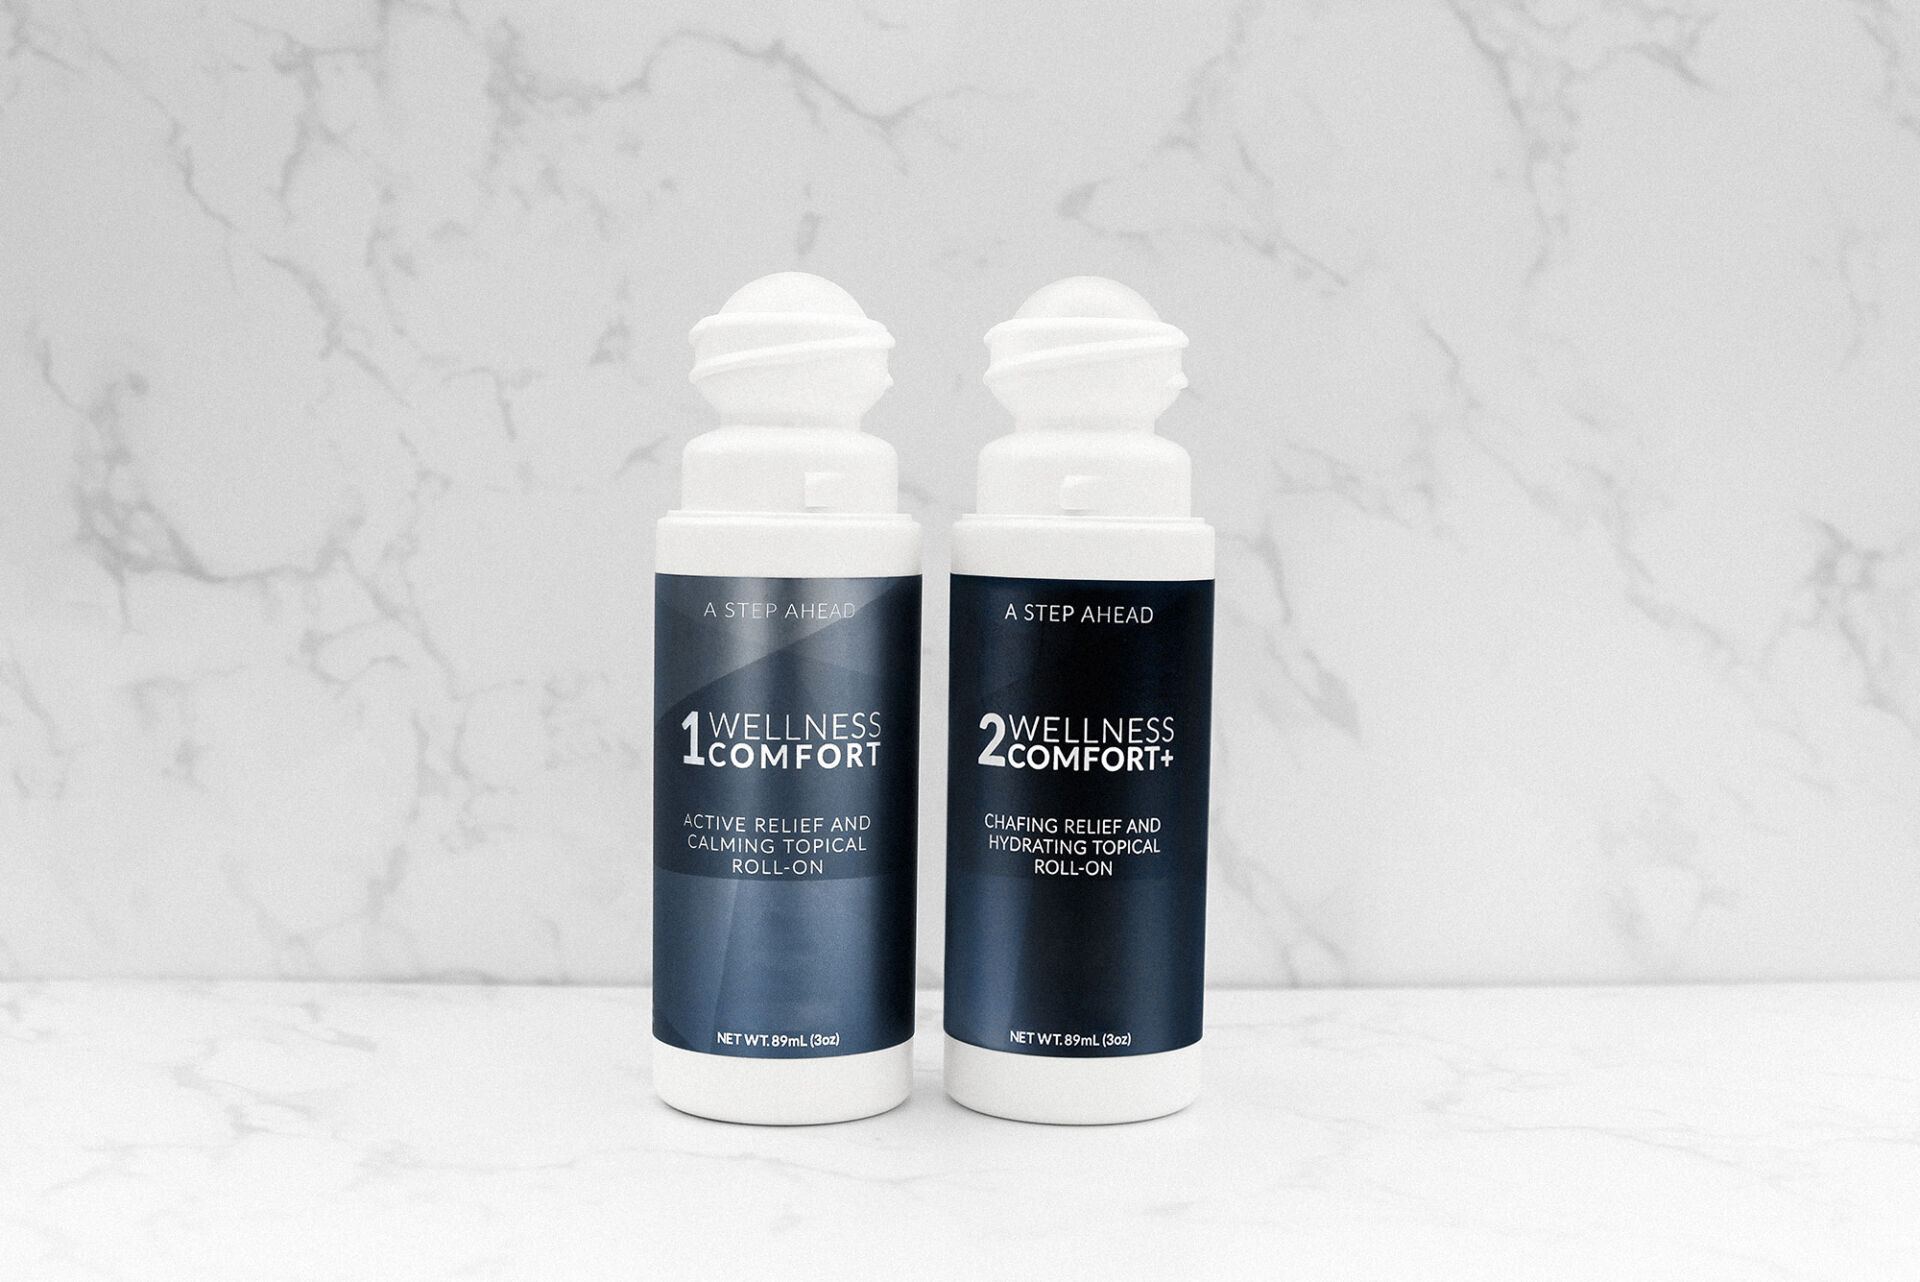 Introducing Our Custom Topical Formula for Amputees: A Step Ahead